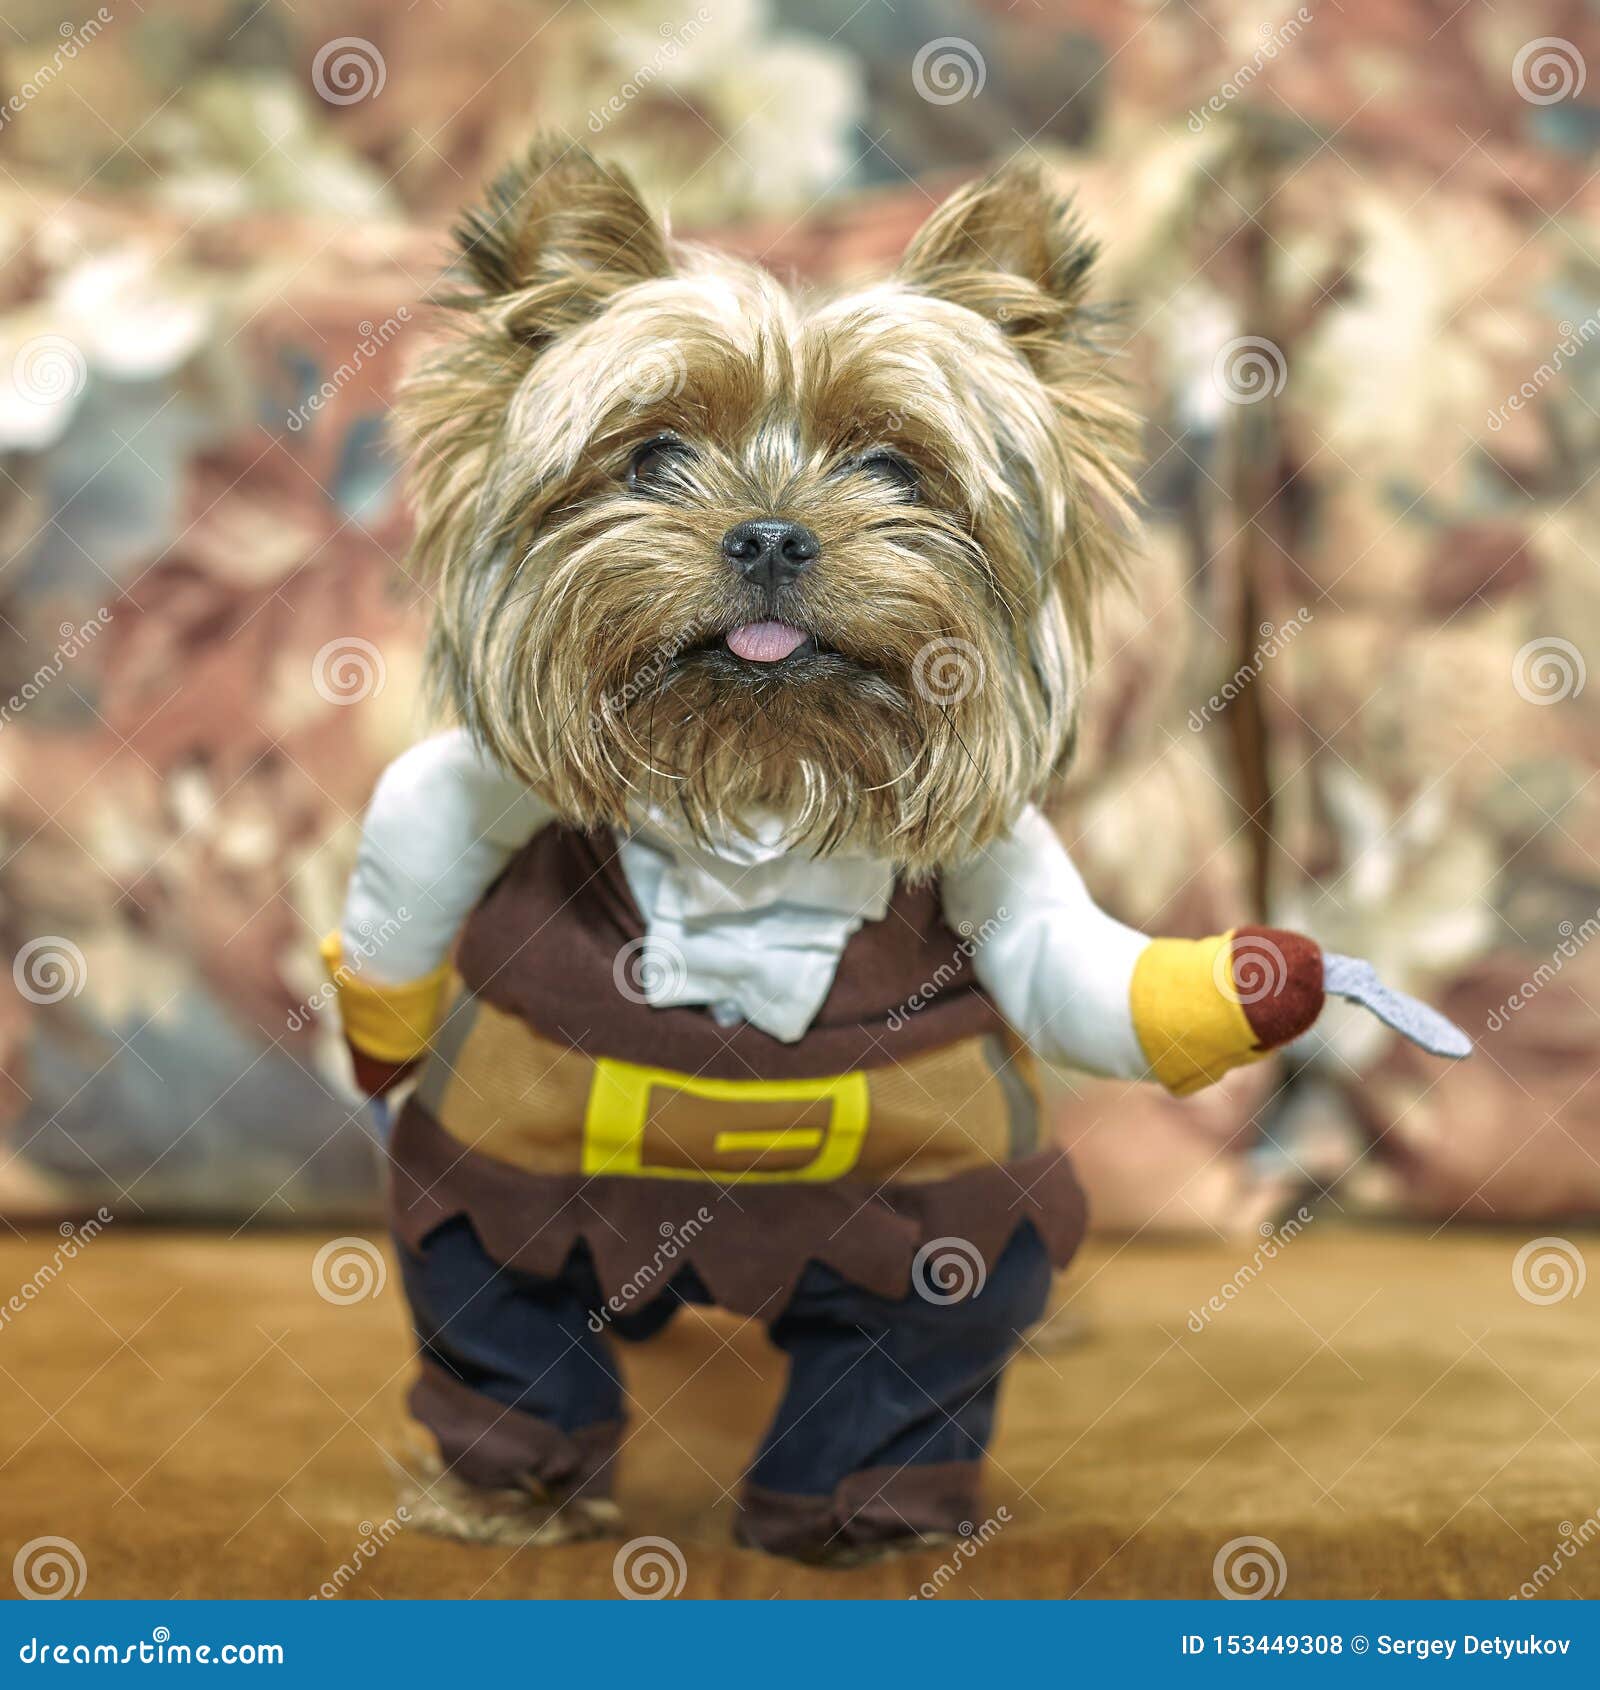 An Adorable Little Old Yorkshire Terrier Puppy on a Coach with a Pirate  Costume. Cosplay Stock Photo - Image of black, guard: 153449308